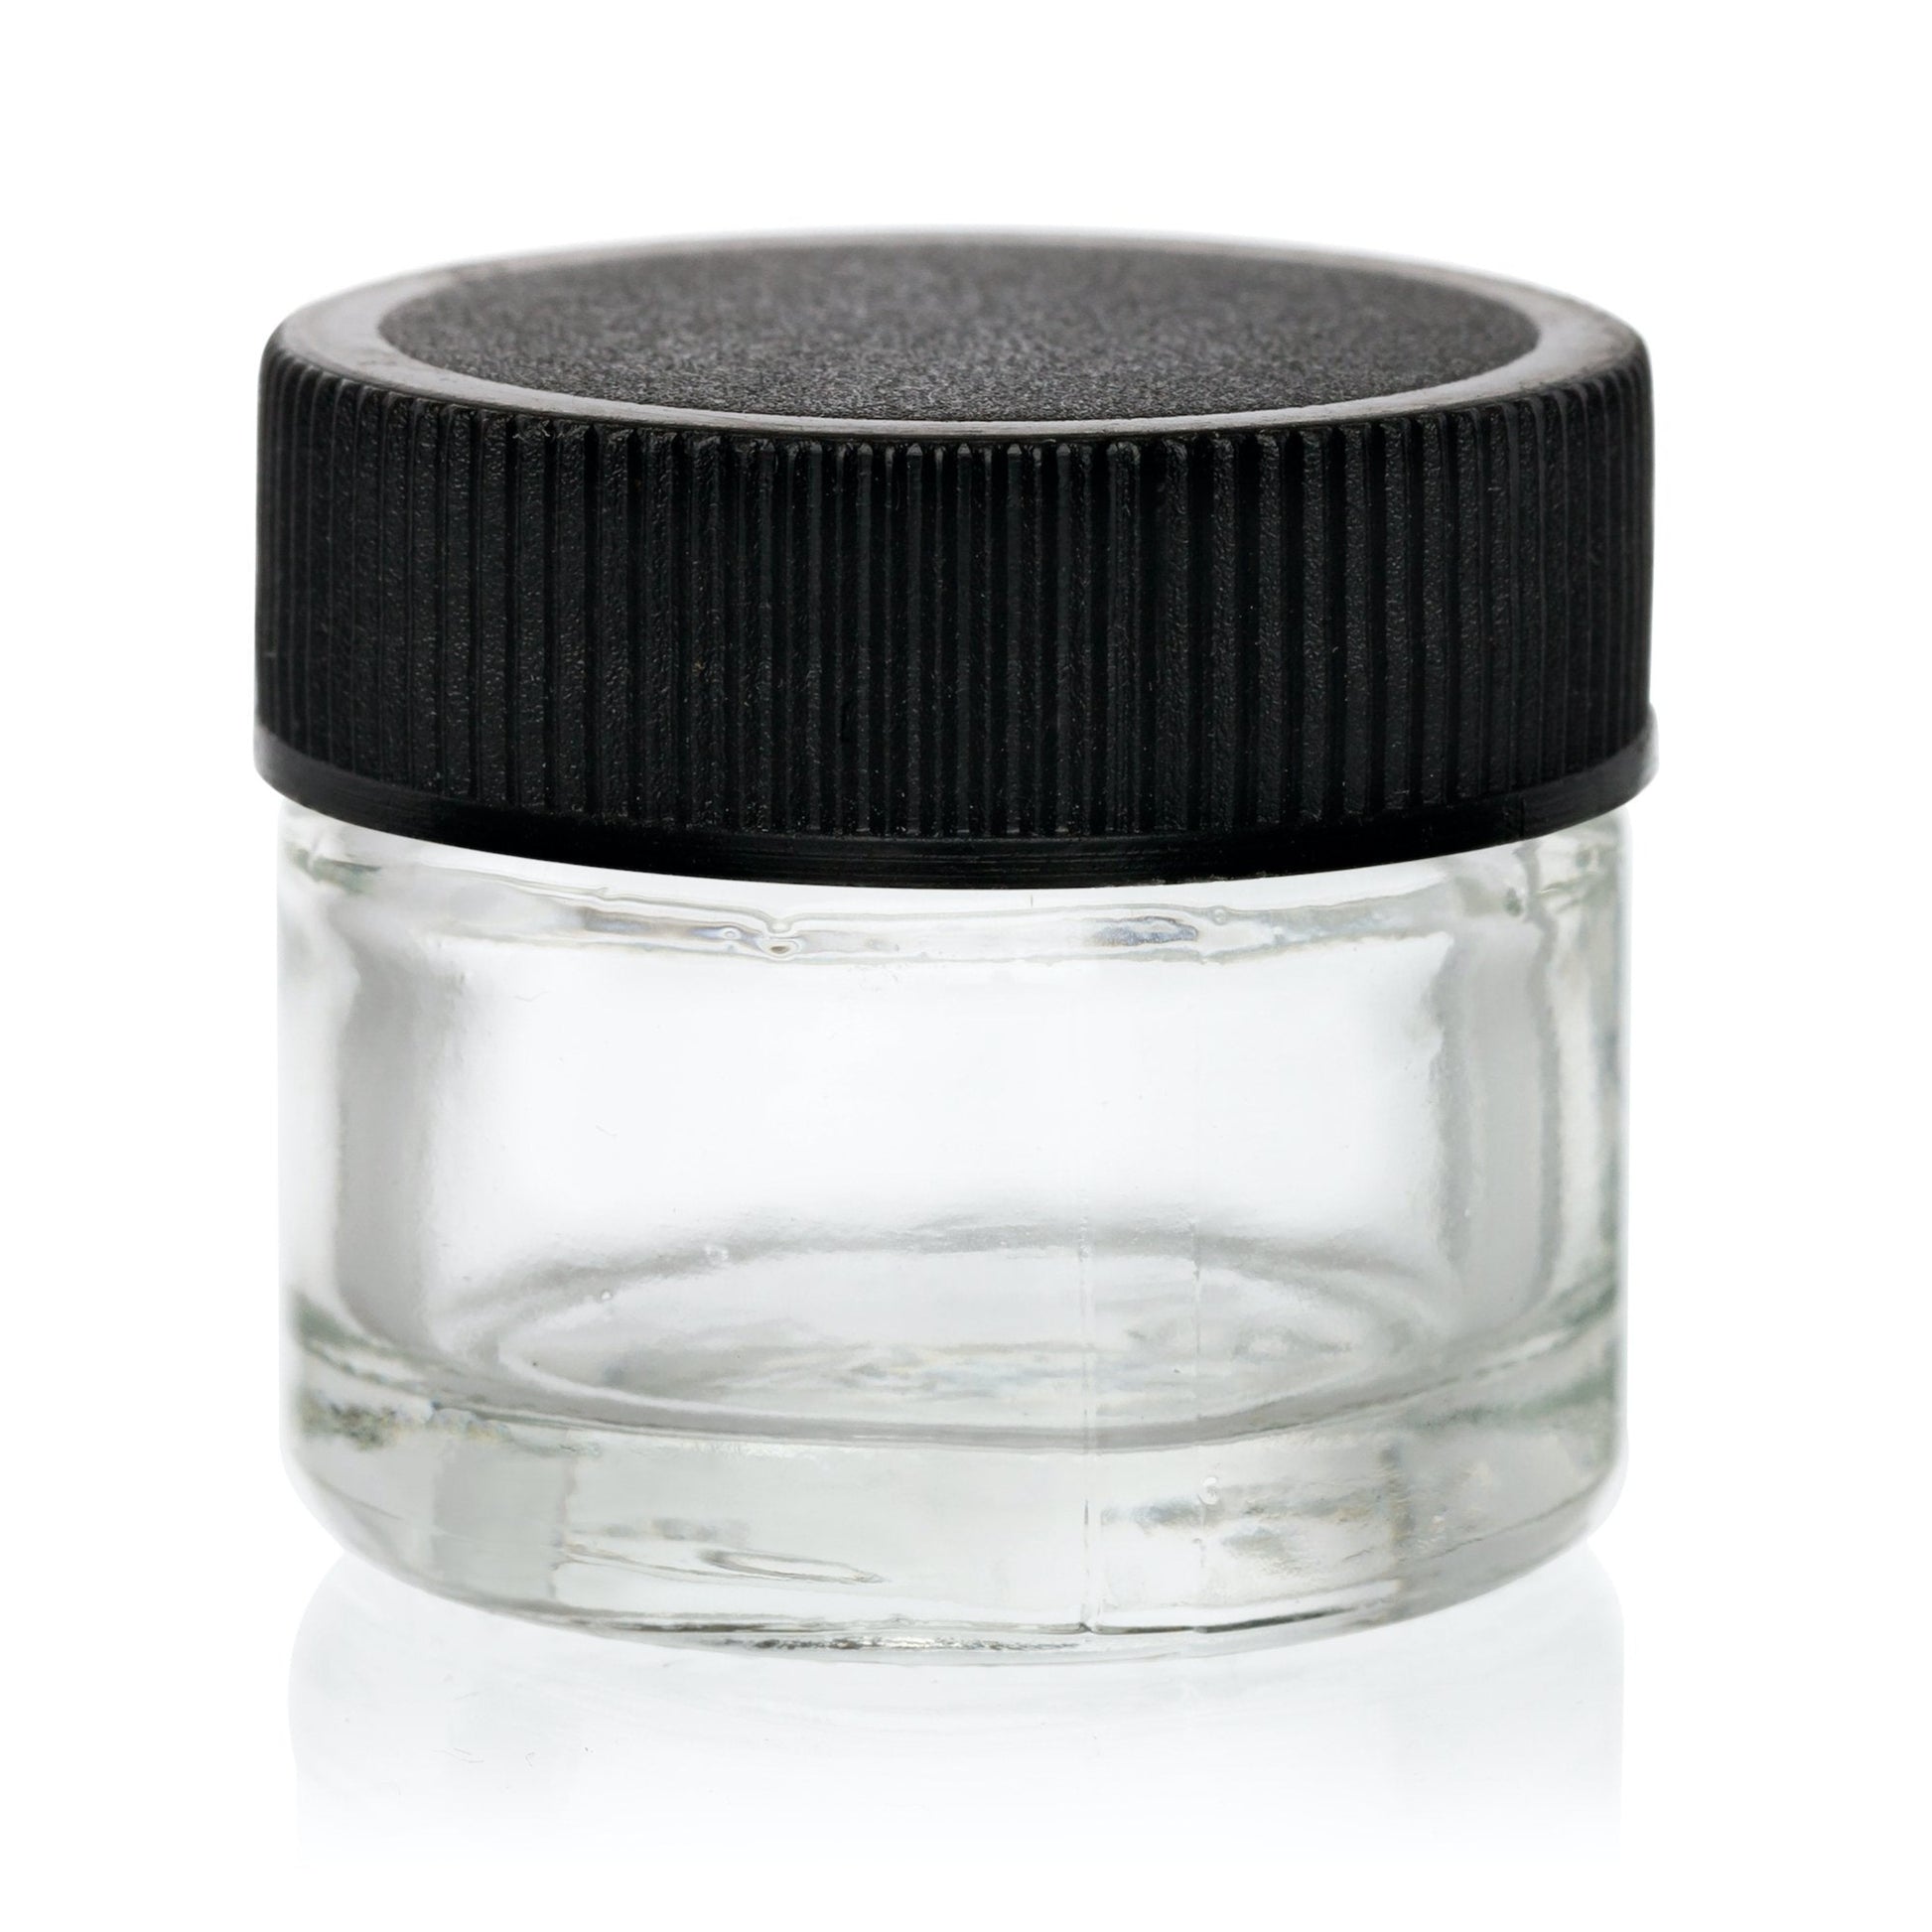 5mL glass concentrate container